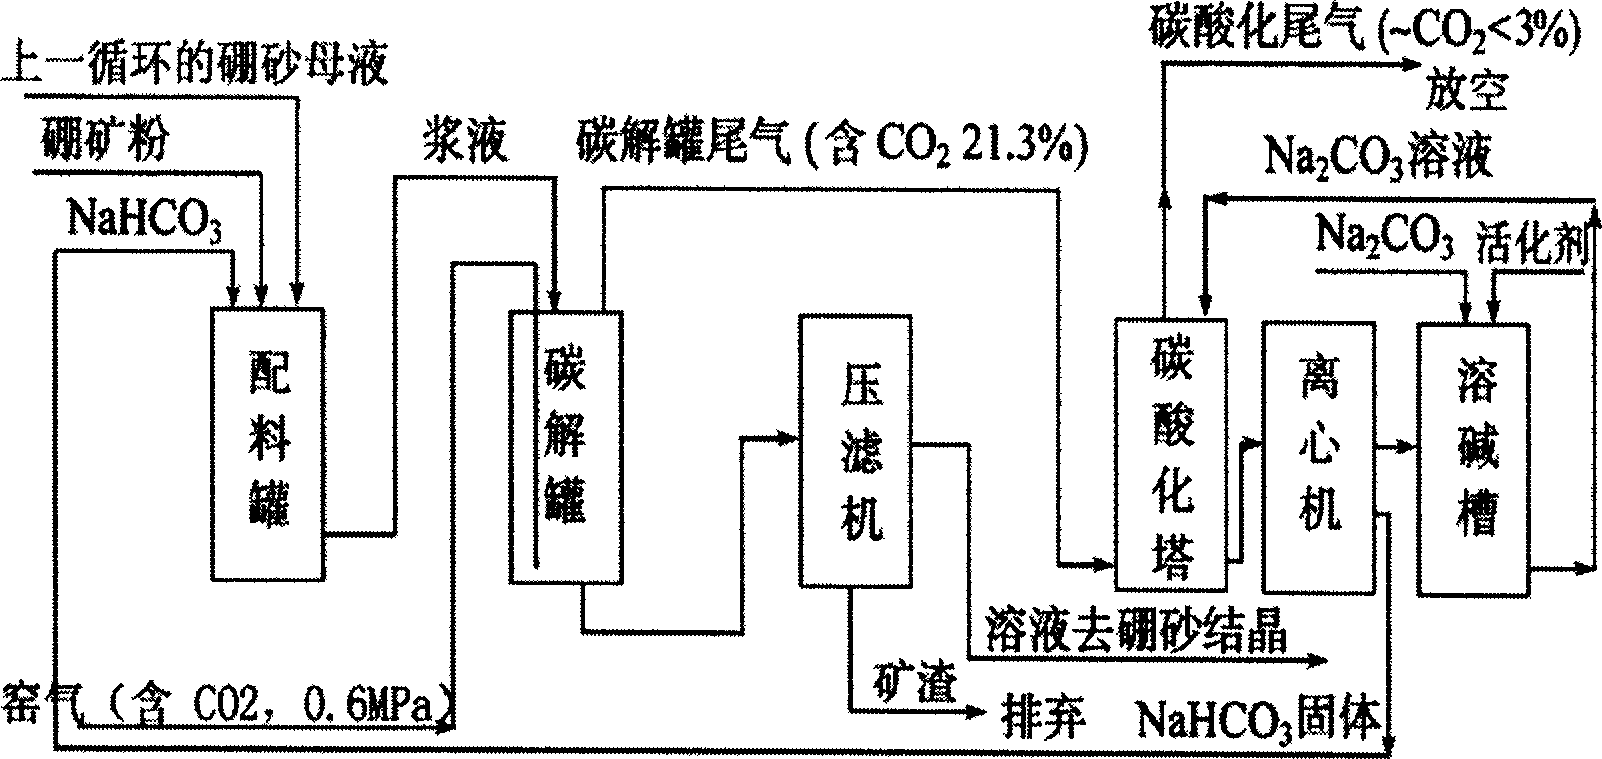 Technology of carbon alkali method for producing borax by adding activator